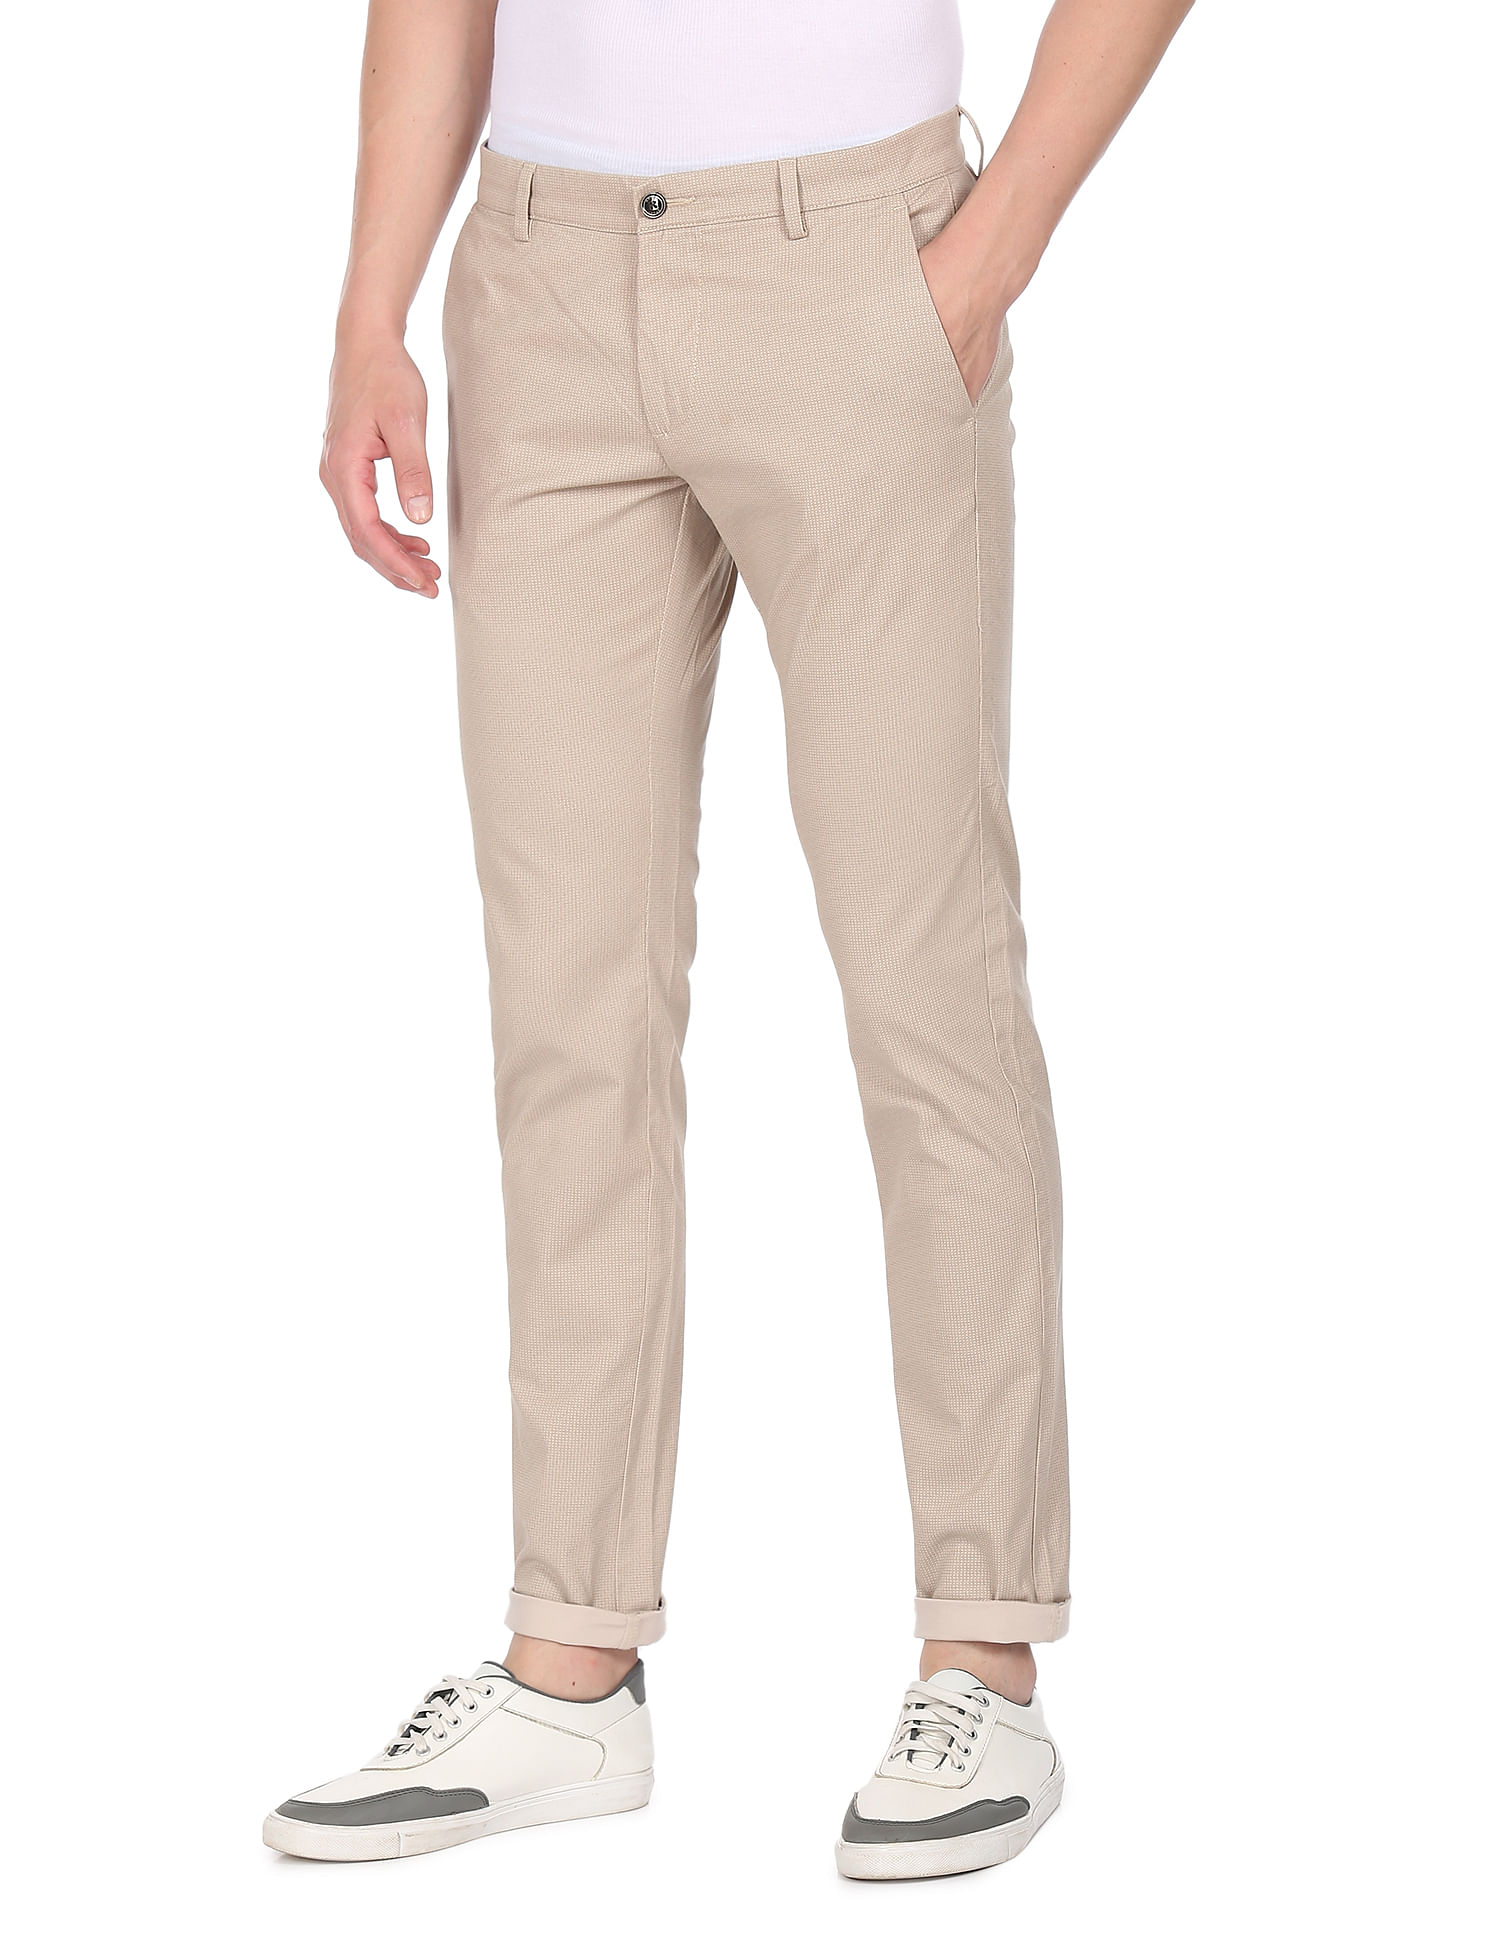 Buy White Trousers  Pants for Men by NOW OR NEVER Online  Ajiocom